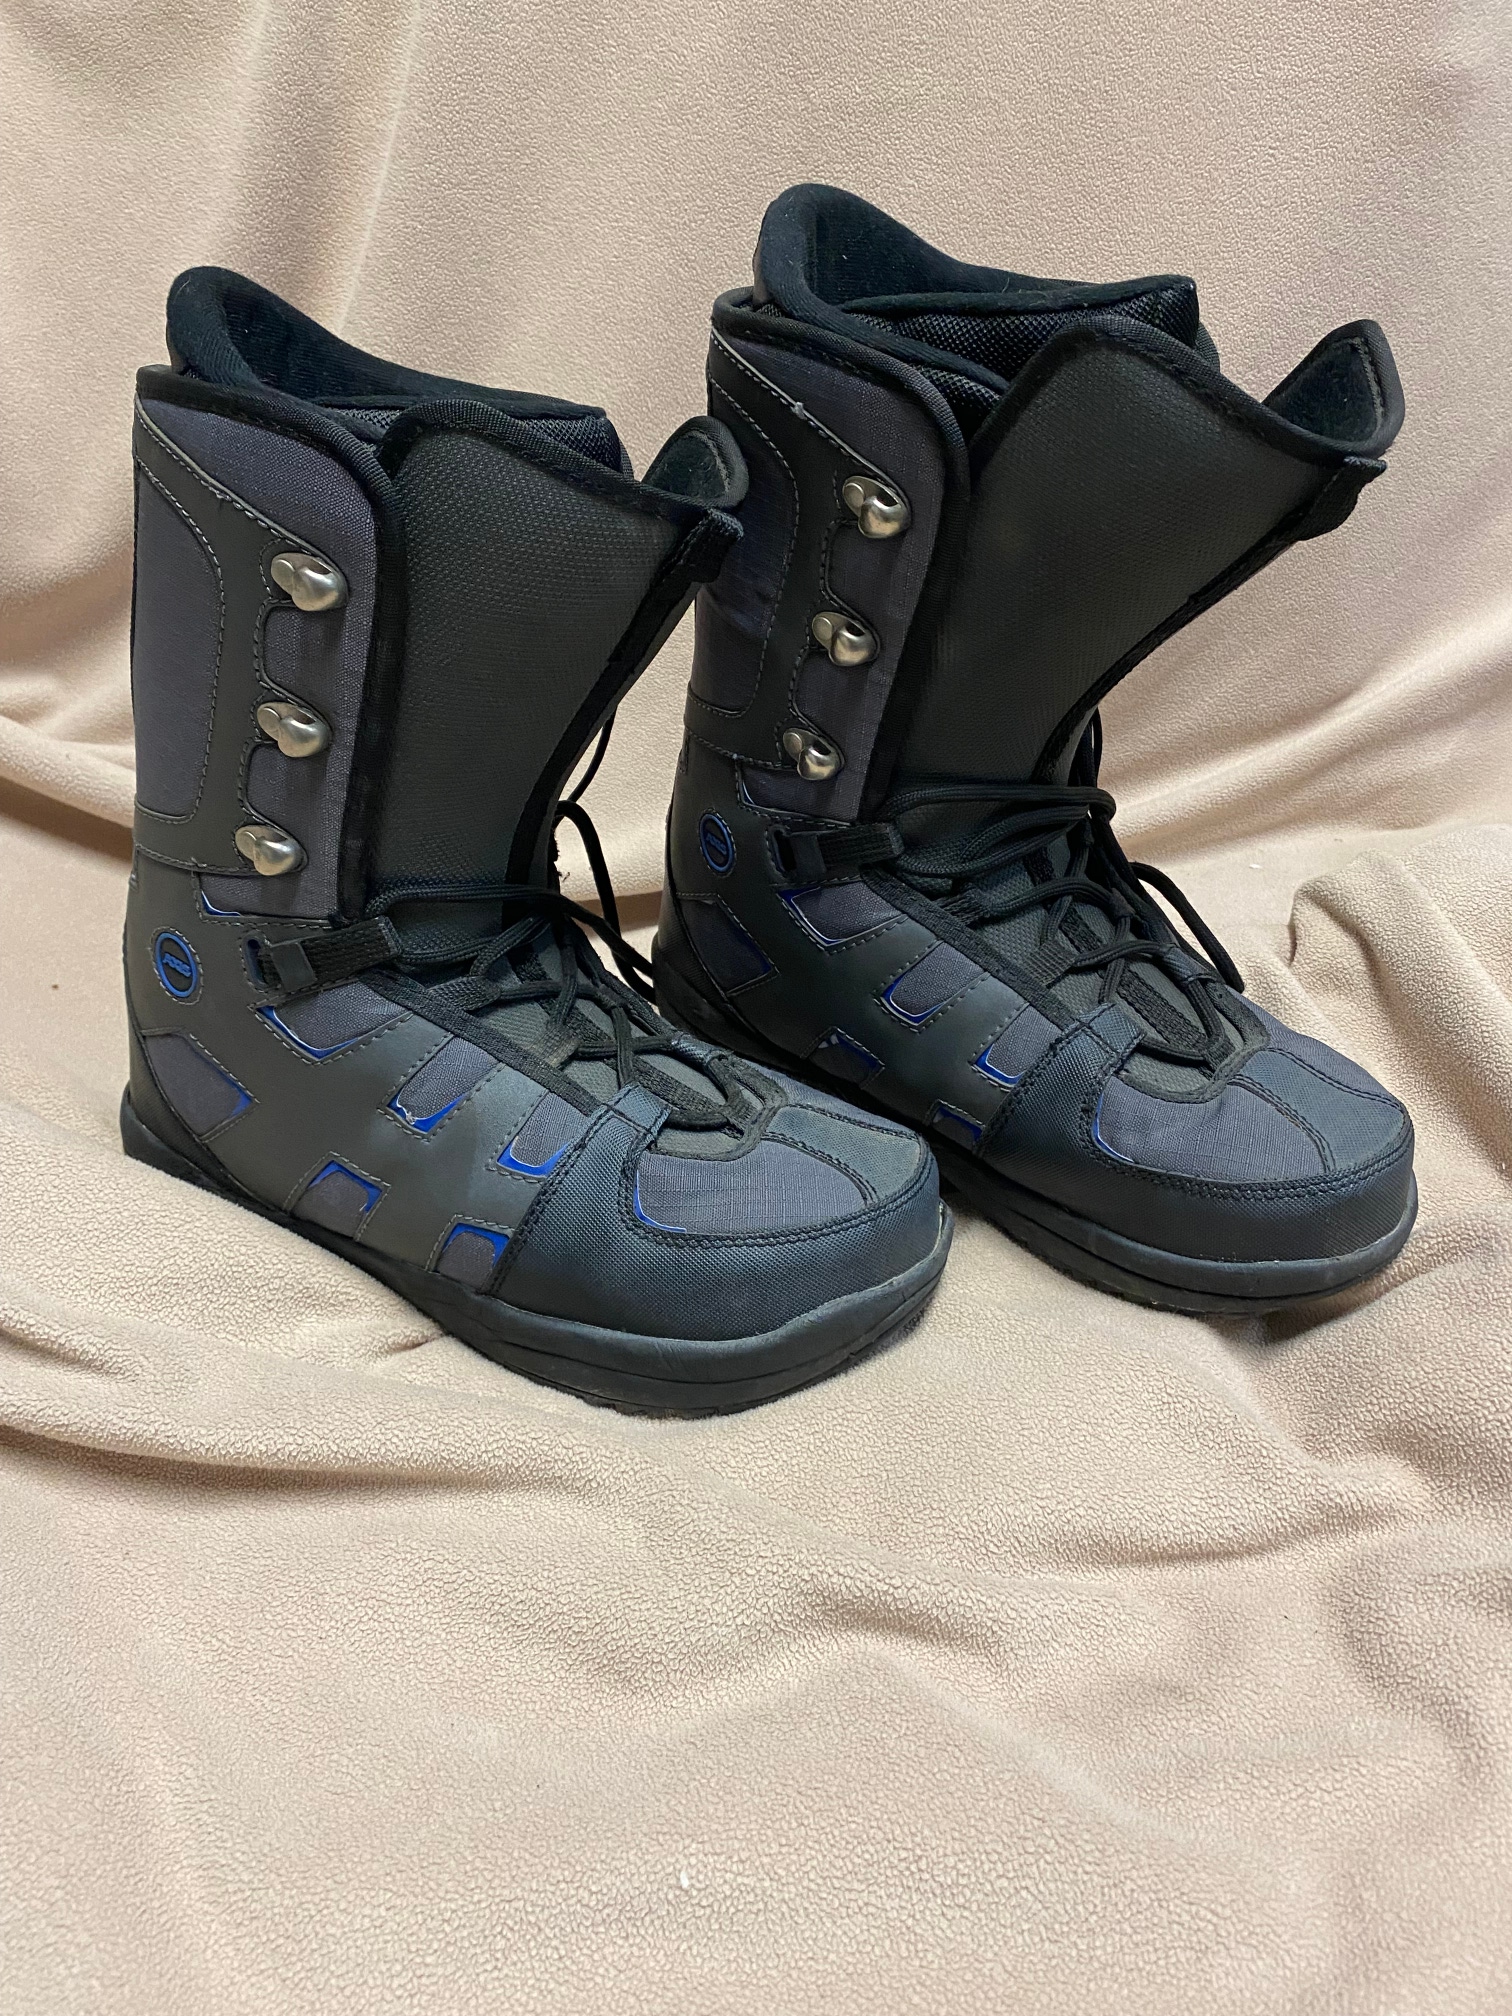 Men's Used Size 10 (Women's 11) Axis Snowboard Boots